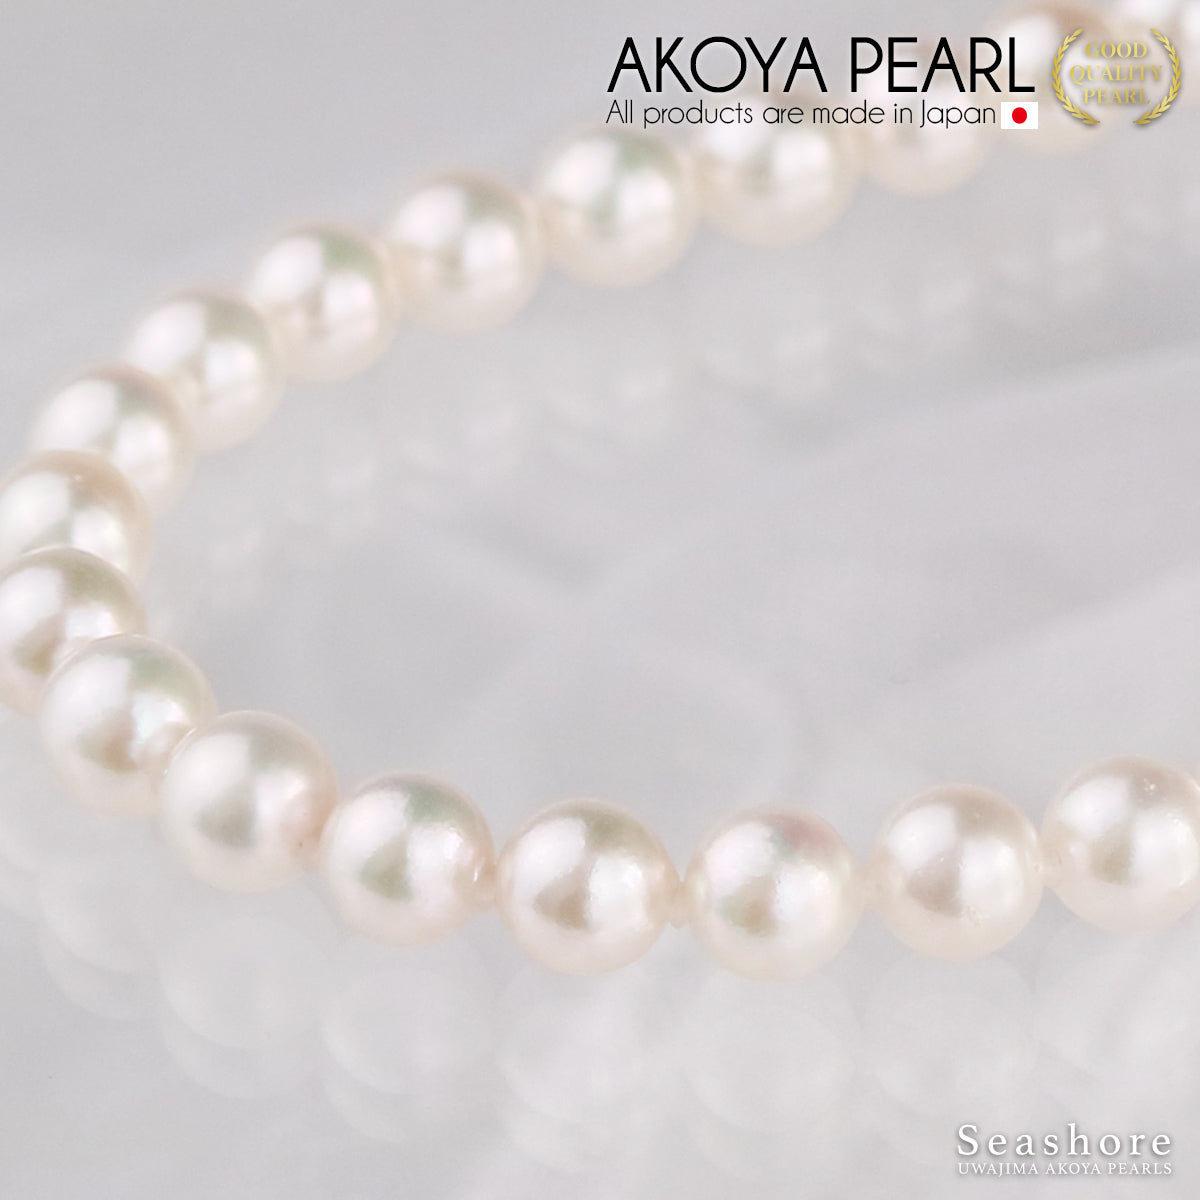 [Hanadama Certified Pearls] Formal Necklace Set of 2 [7.5-8.0mm] (Earrings included) Akoya Pearls with storage case [New Japan Pearl Research Institute Certificate of Authenticity]